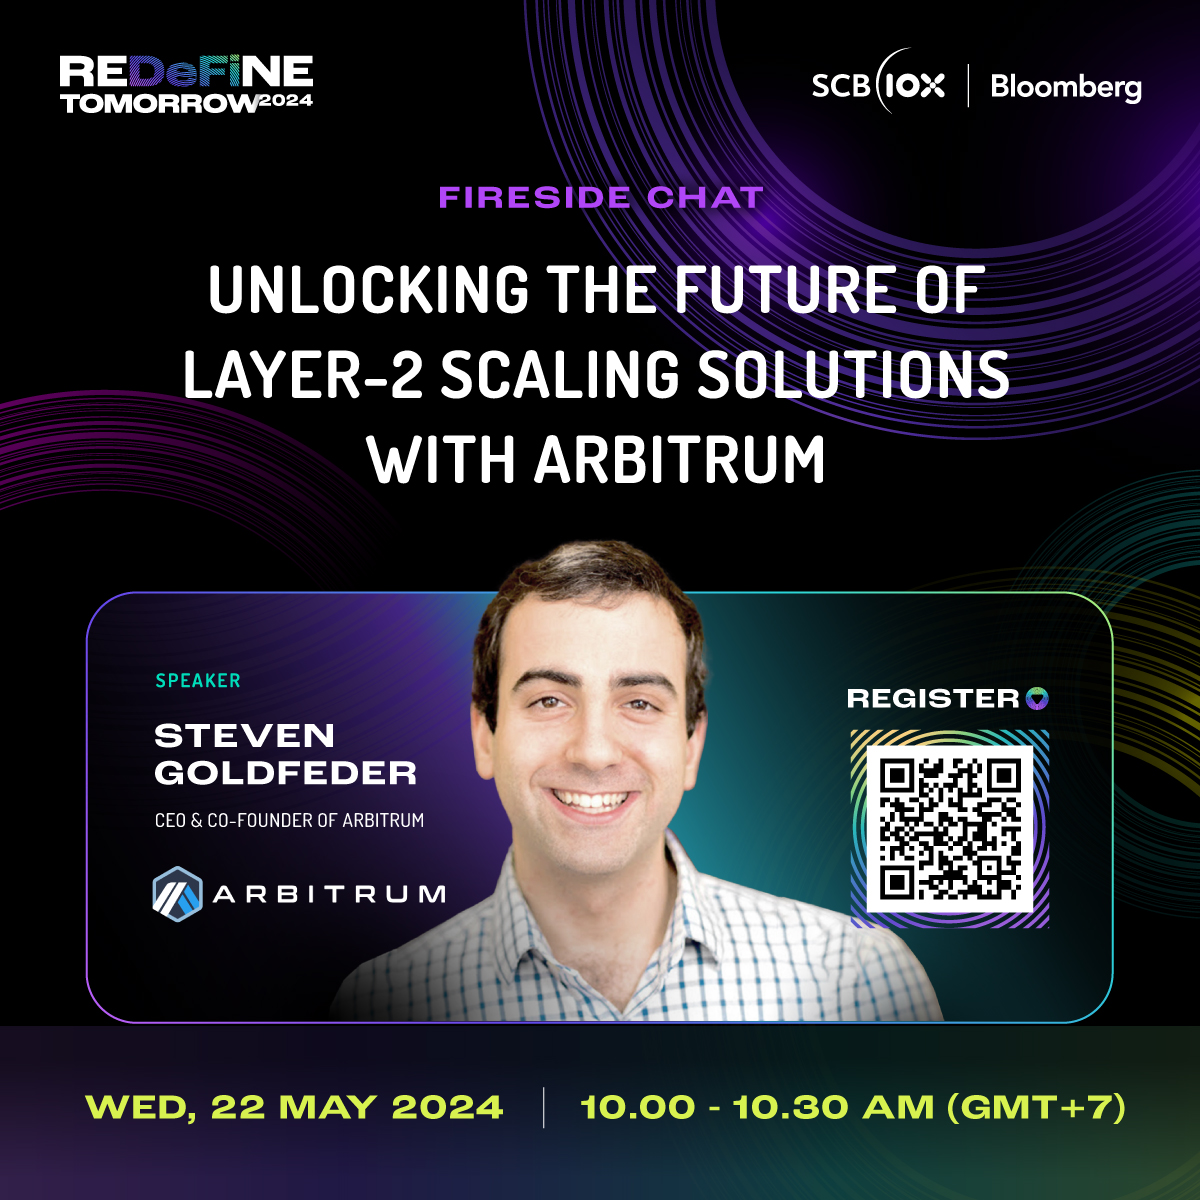 Meet the speaker at #REDeFiNETOMORROW2024 / 21-22 May 2024 Fireside Chat: Unlocking the Future of Layer-2 Scaling Solutions With Arbitrum @sgoldfed of @arbitrum Free ticket: bloombergevents.com/SCB10x_2024